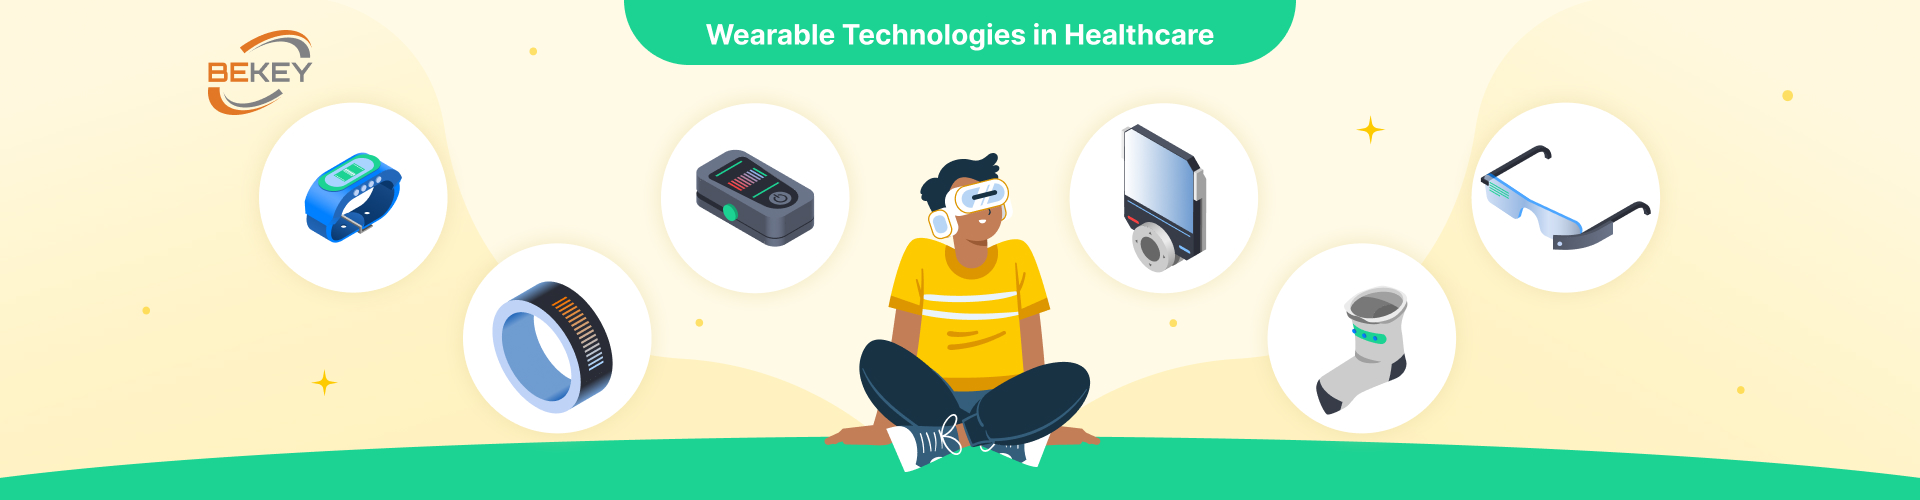 Wearable Technologies in Healthcare - image